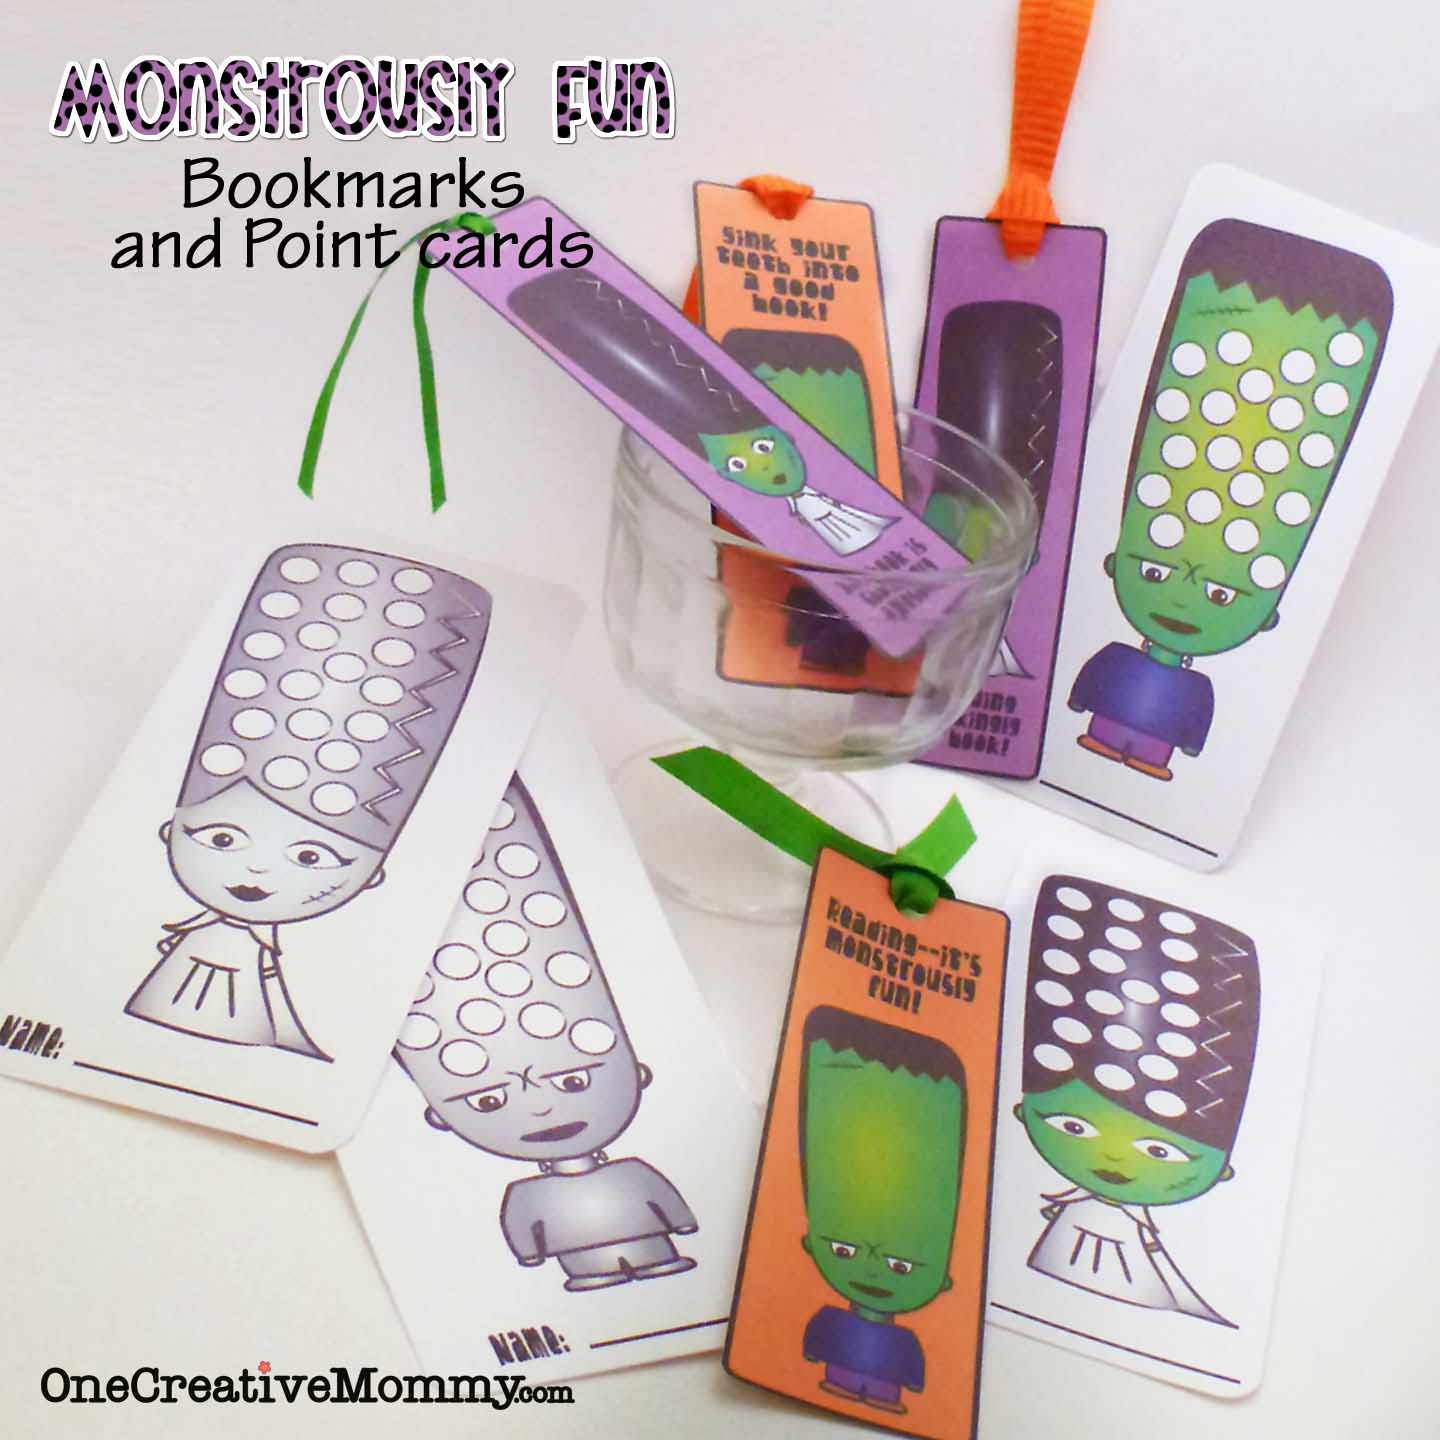 Monstrously Fun Book Marks and Point Cards